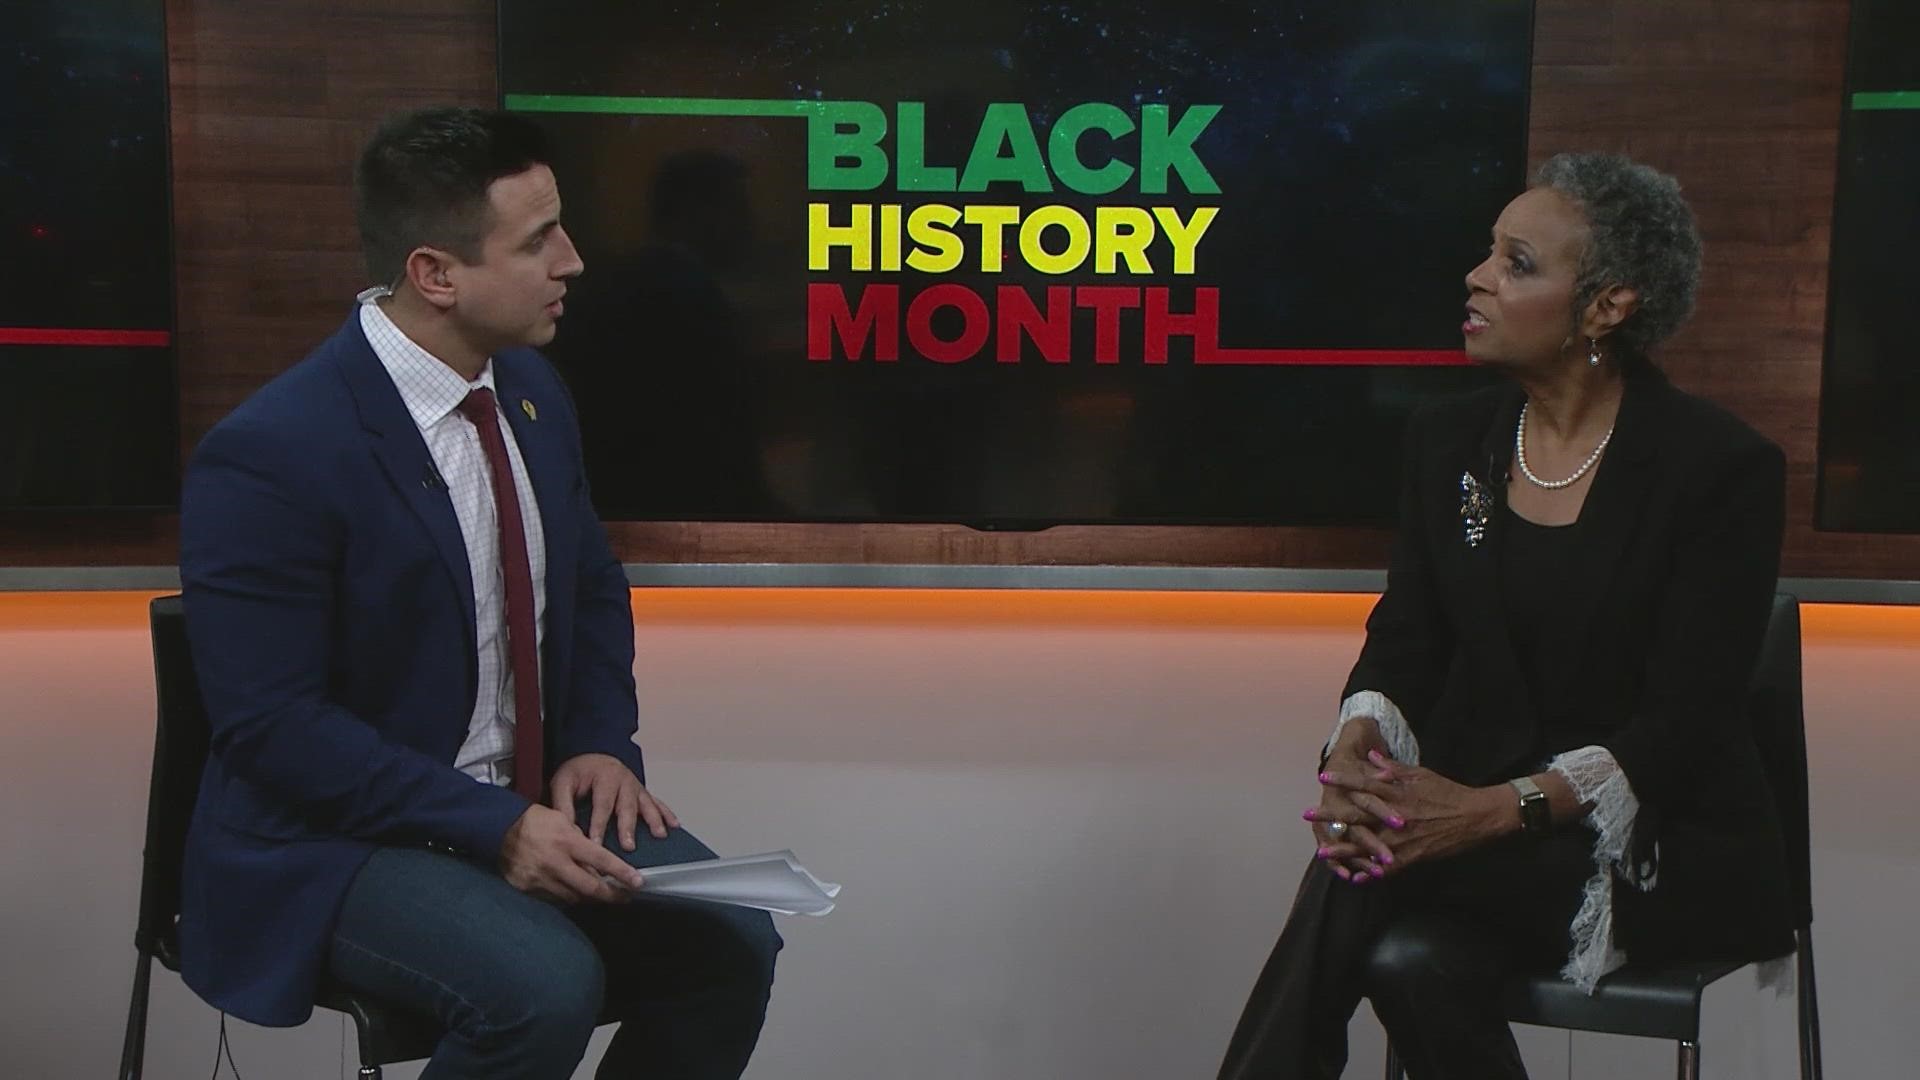 9NEWS Racial Equity Expert, Dr. Rosemarie Allen talks about the importance of celebrating Black History Month.